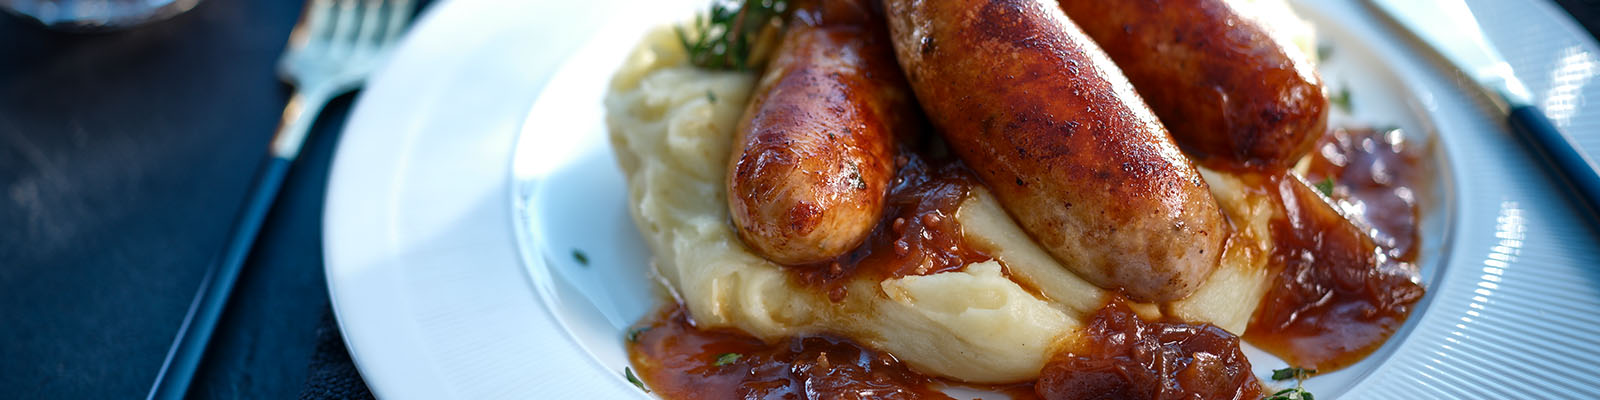 Neven Maguire's Bangers & Cheesy Mash with Caramelised Red Onion Gravy